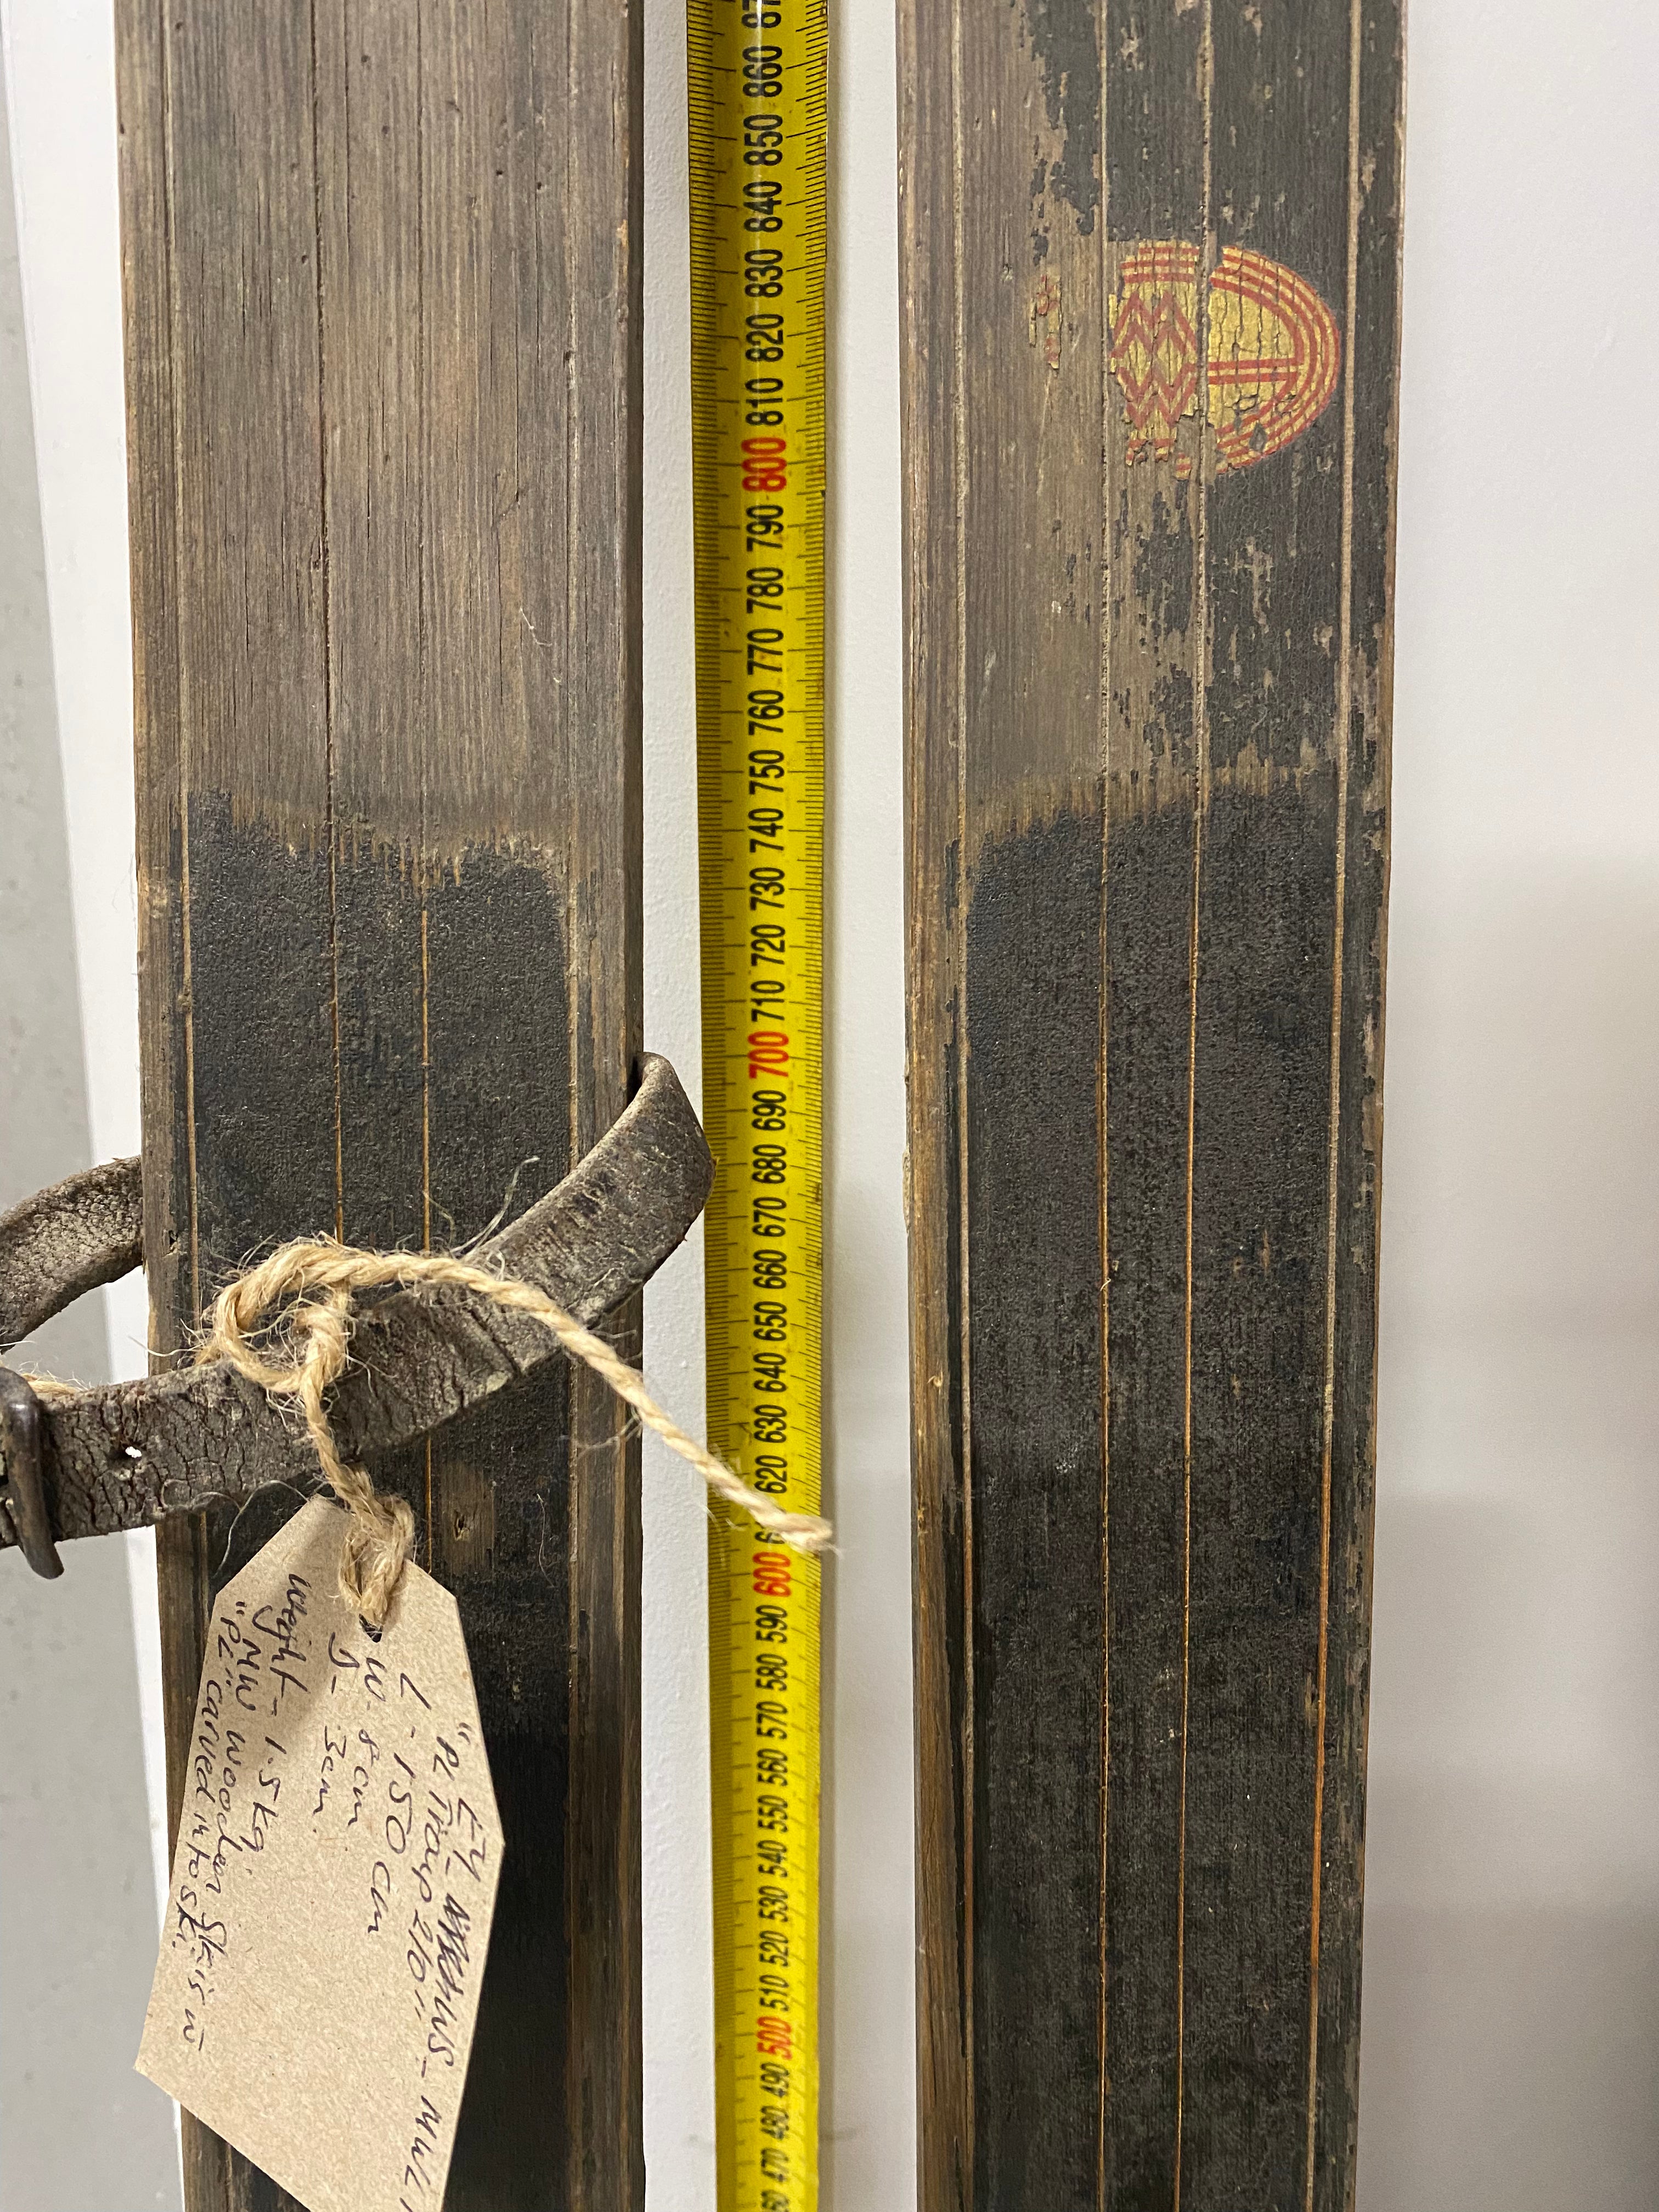 Front view of ski bindings: Montgomery Ward vintage wooden skis. 1 skis with a leather strap. 1 ski sun faded. leaning against white painted wall with yellow measuring tape